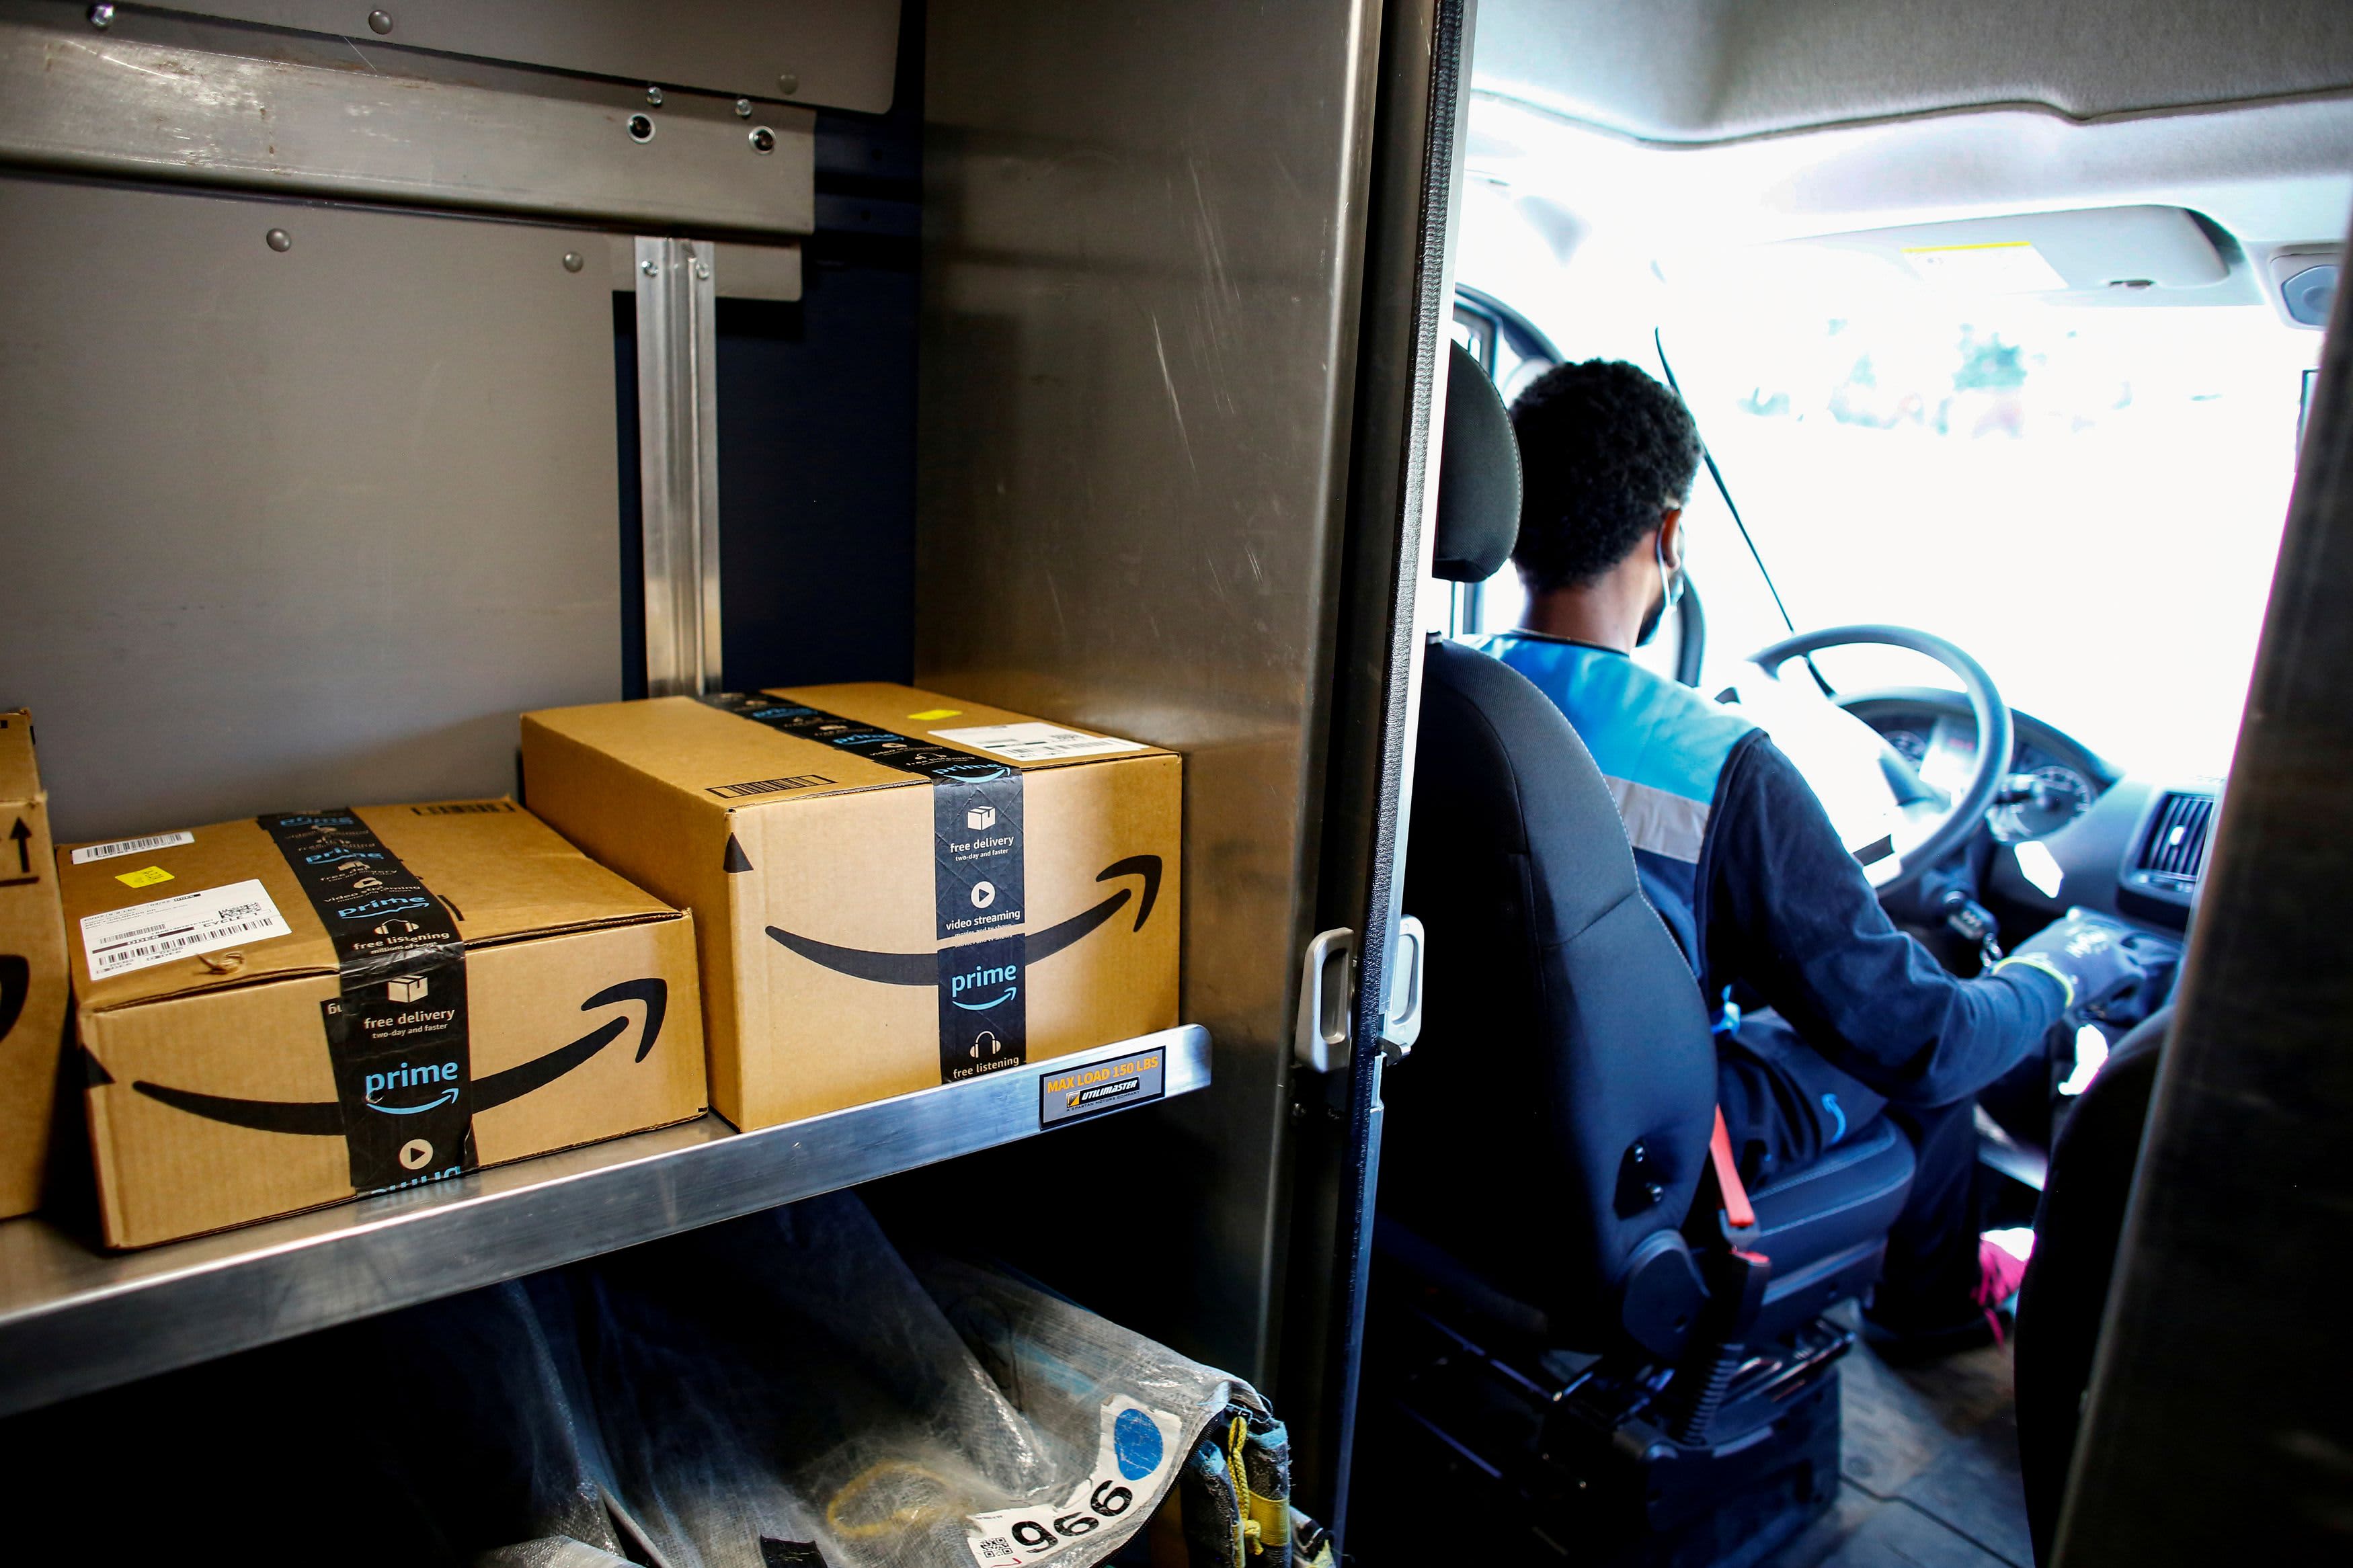 Online shipping costs are expected to continue to rise in the pandemic